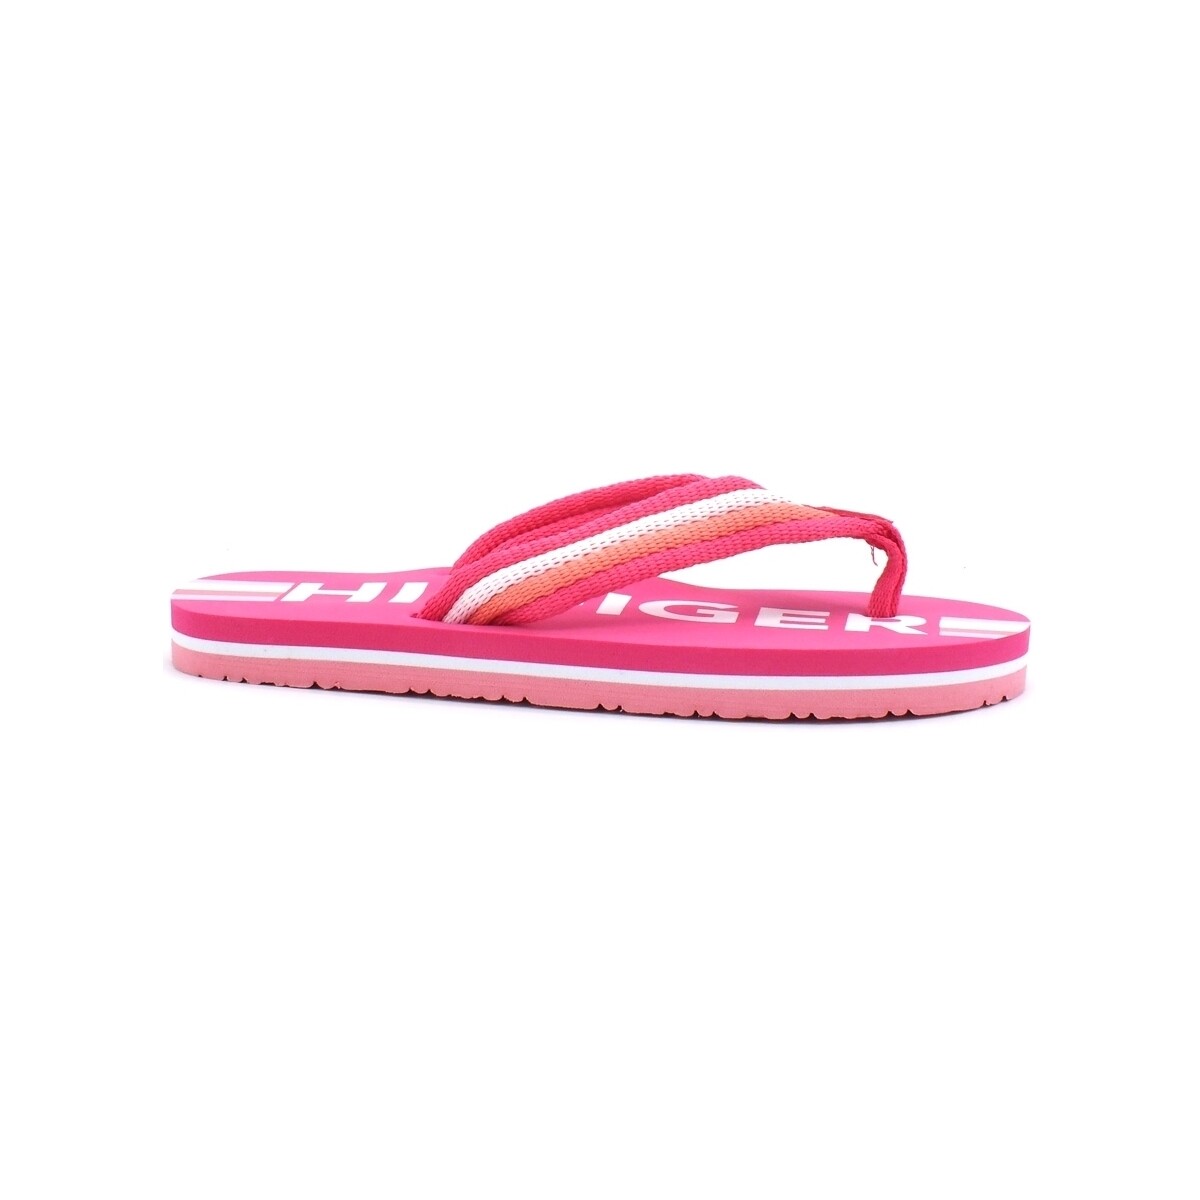 Chaussures Multisport Tommy Hilfiger Ciabatta Fuxia T3A0-30669 Pink